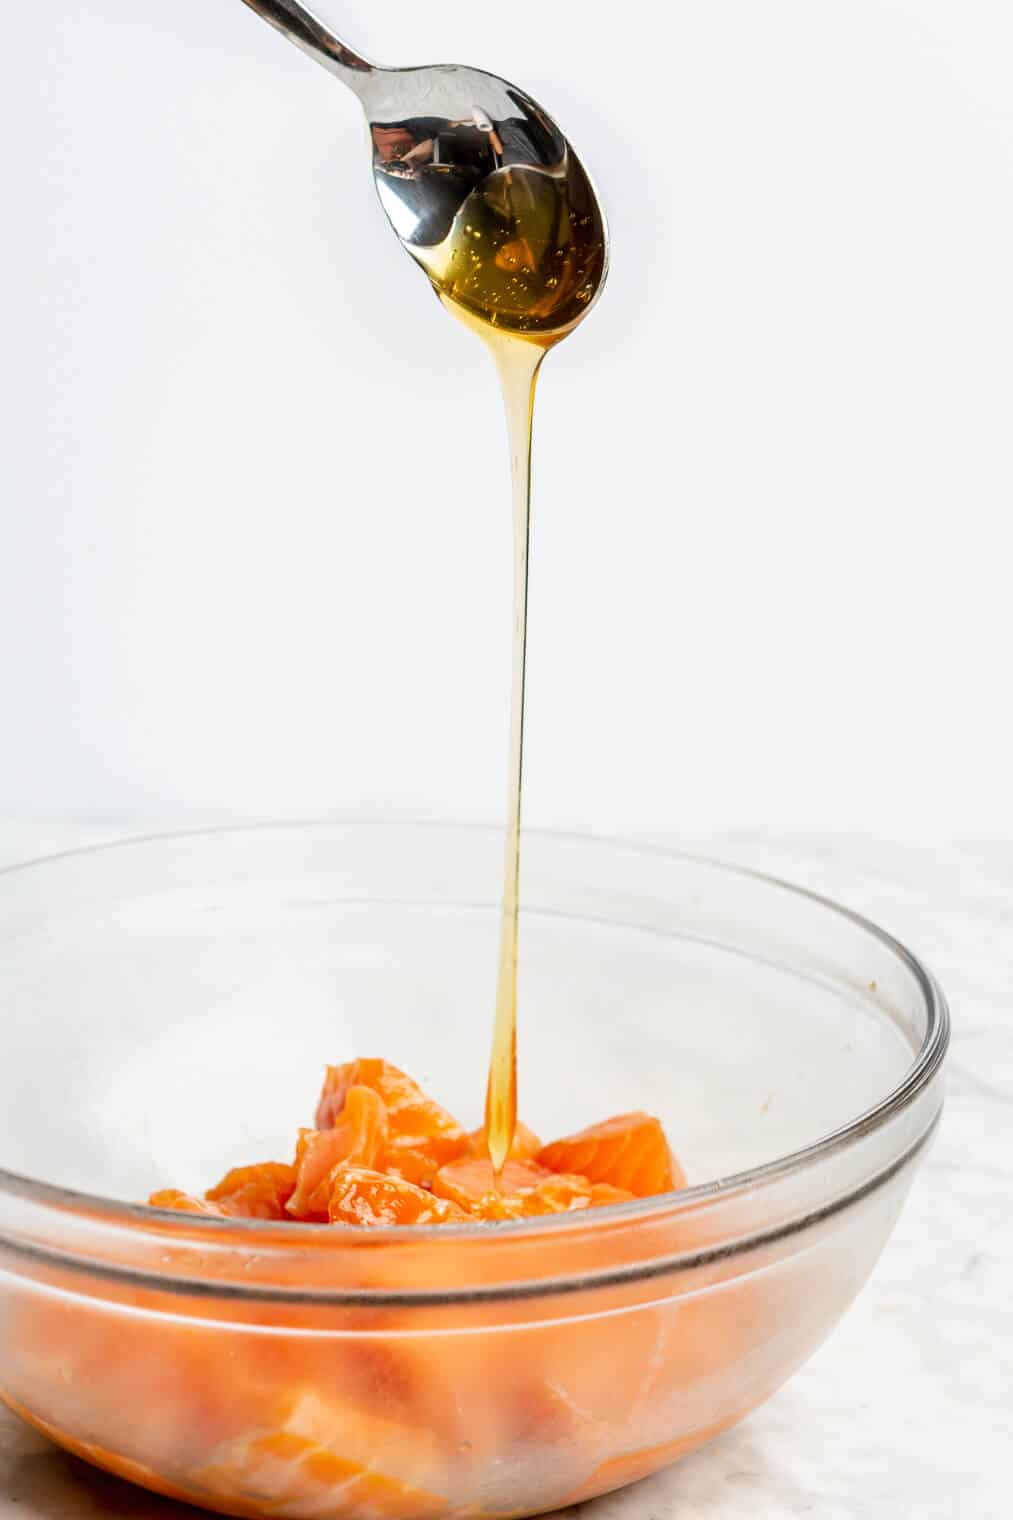 Honey being drizzled over a clear bowl of cubed, raw salmon.